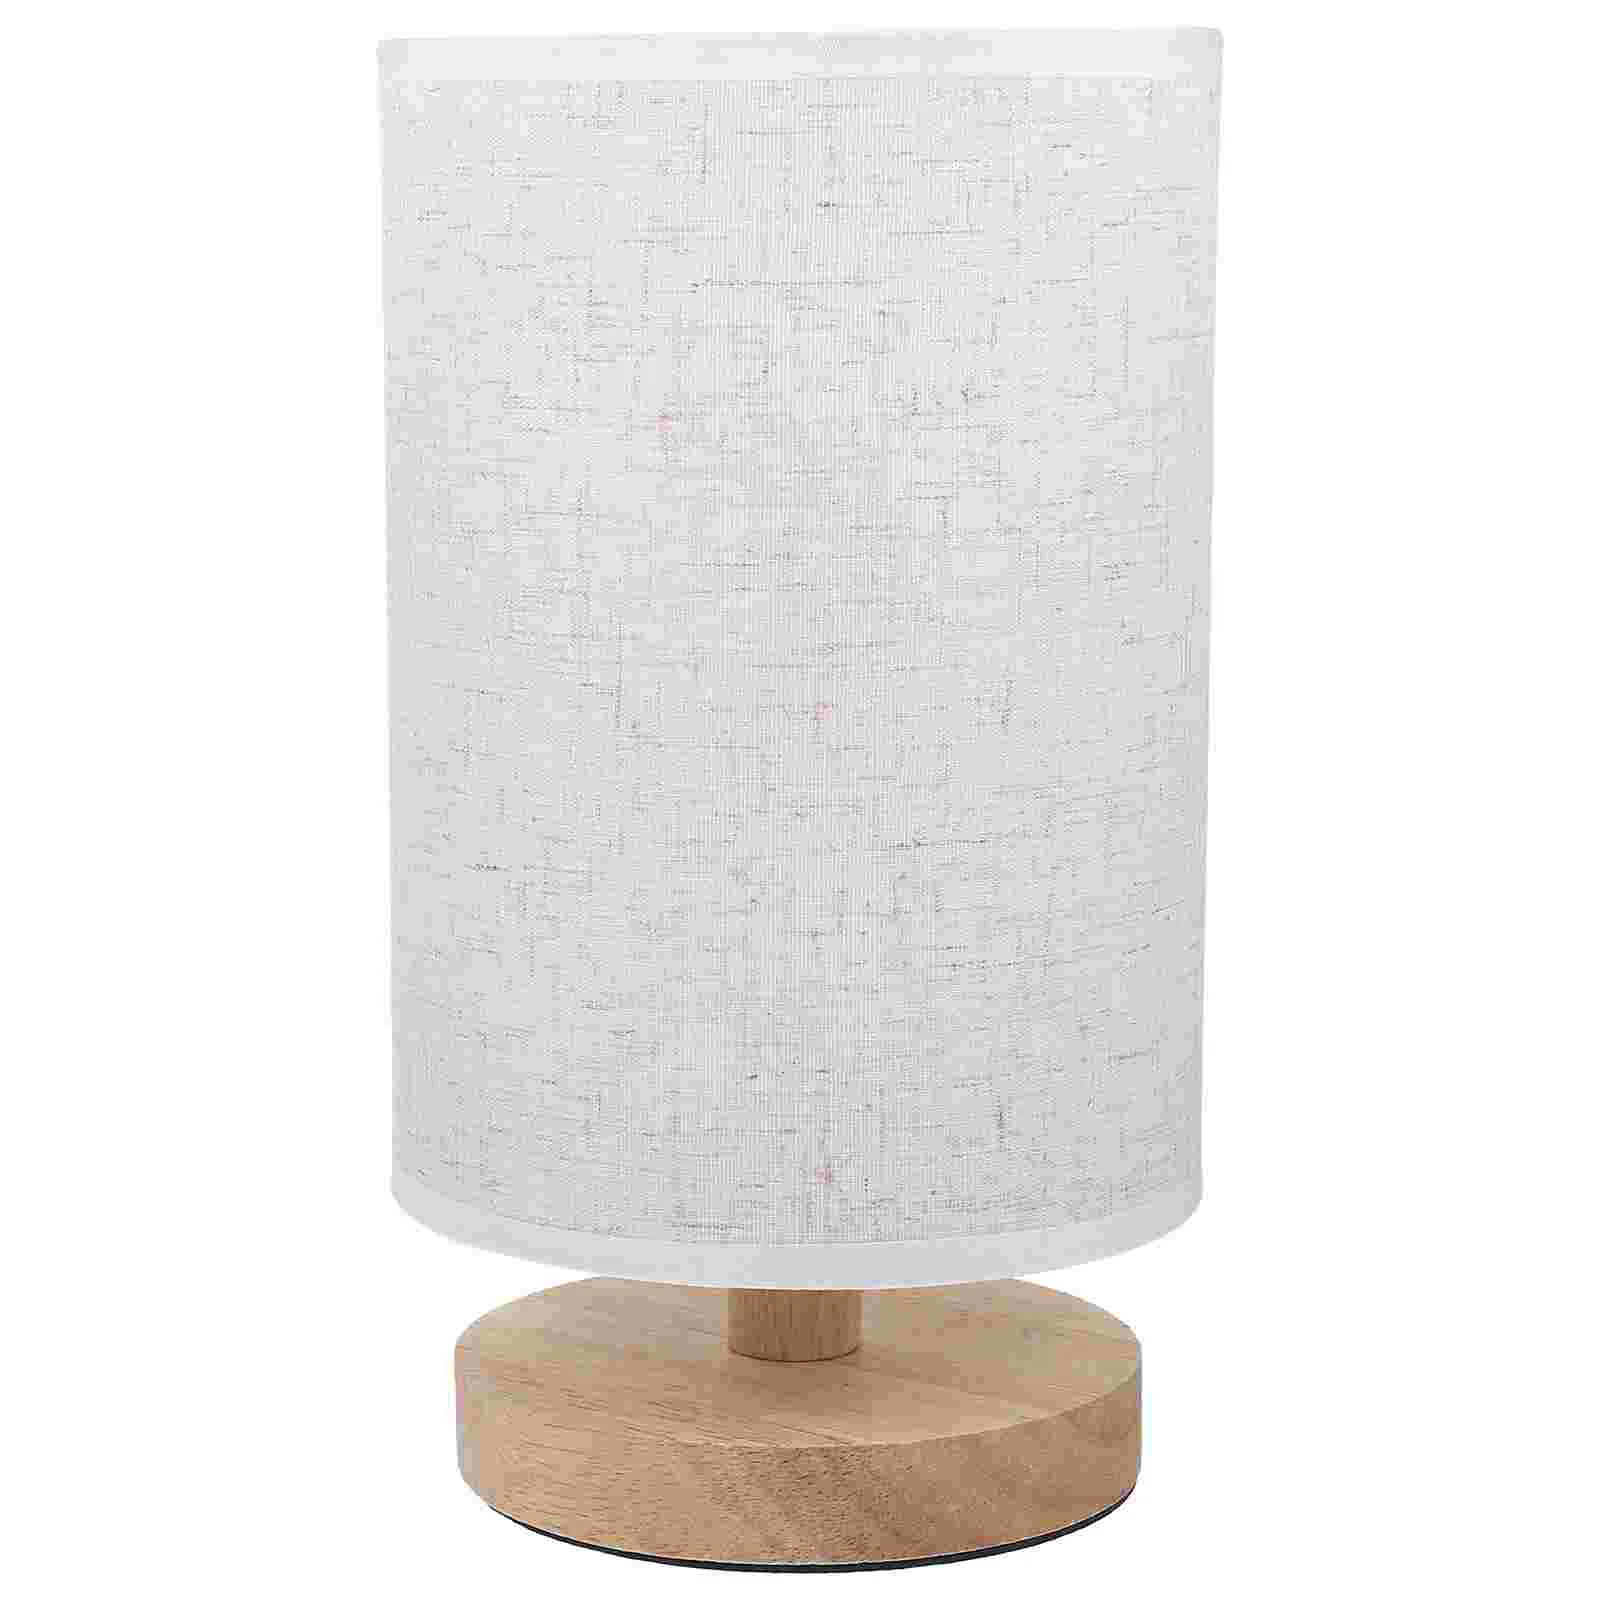 

Table Night Lamp Bedroom Table Lamp Linen Lampshade Bedside Lamp with USB Port